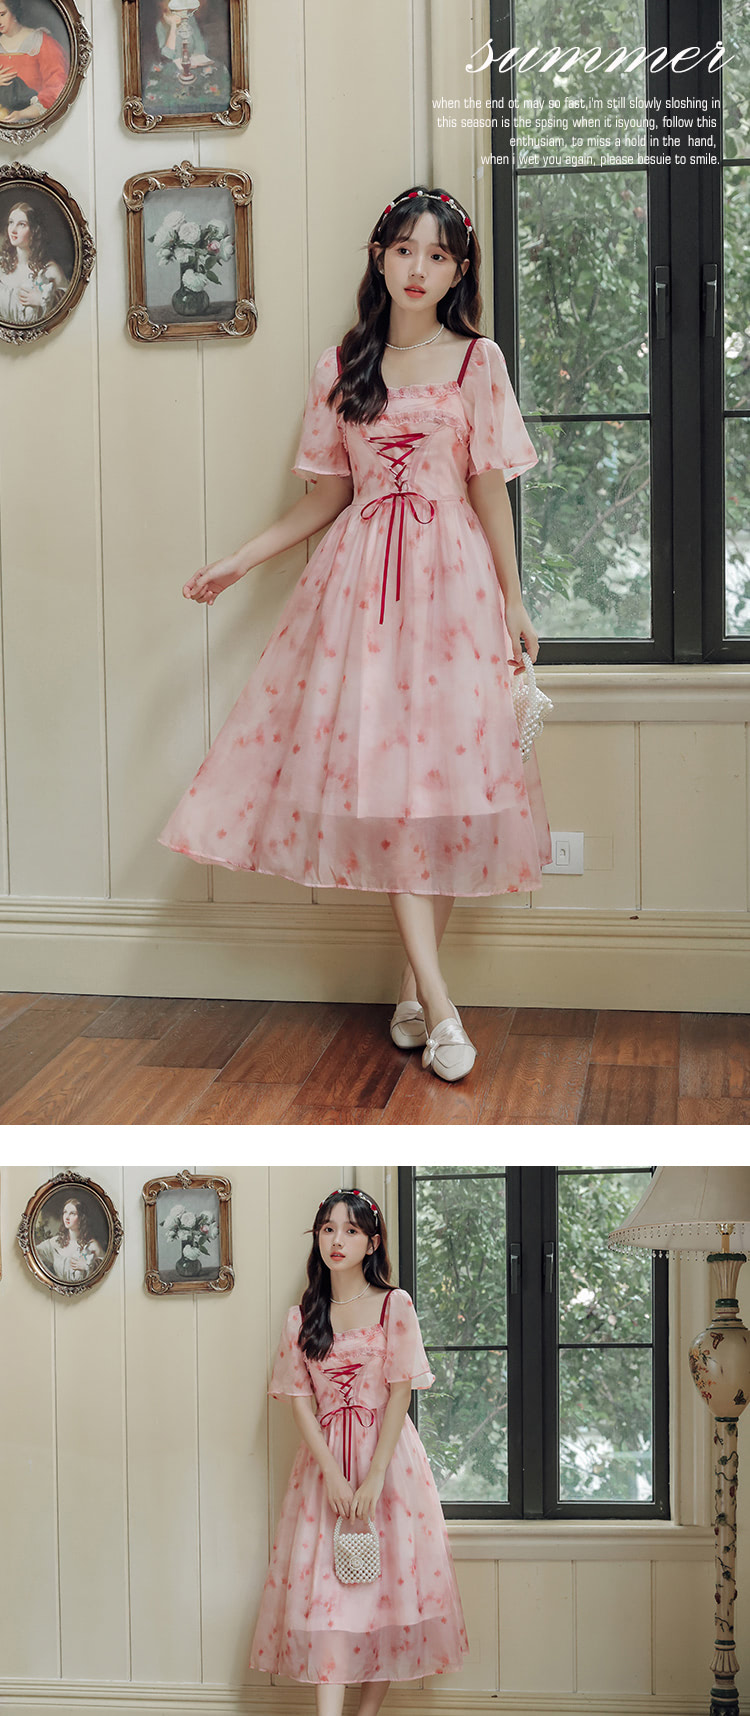 Square-Neck-Peach-Pink-Floral-Print-Dyed-Summer-Casual-Sun-Dress13